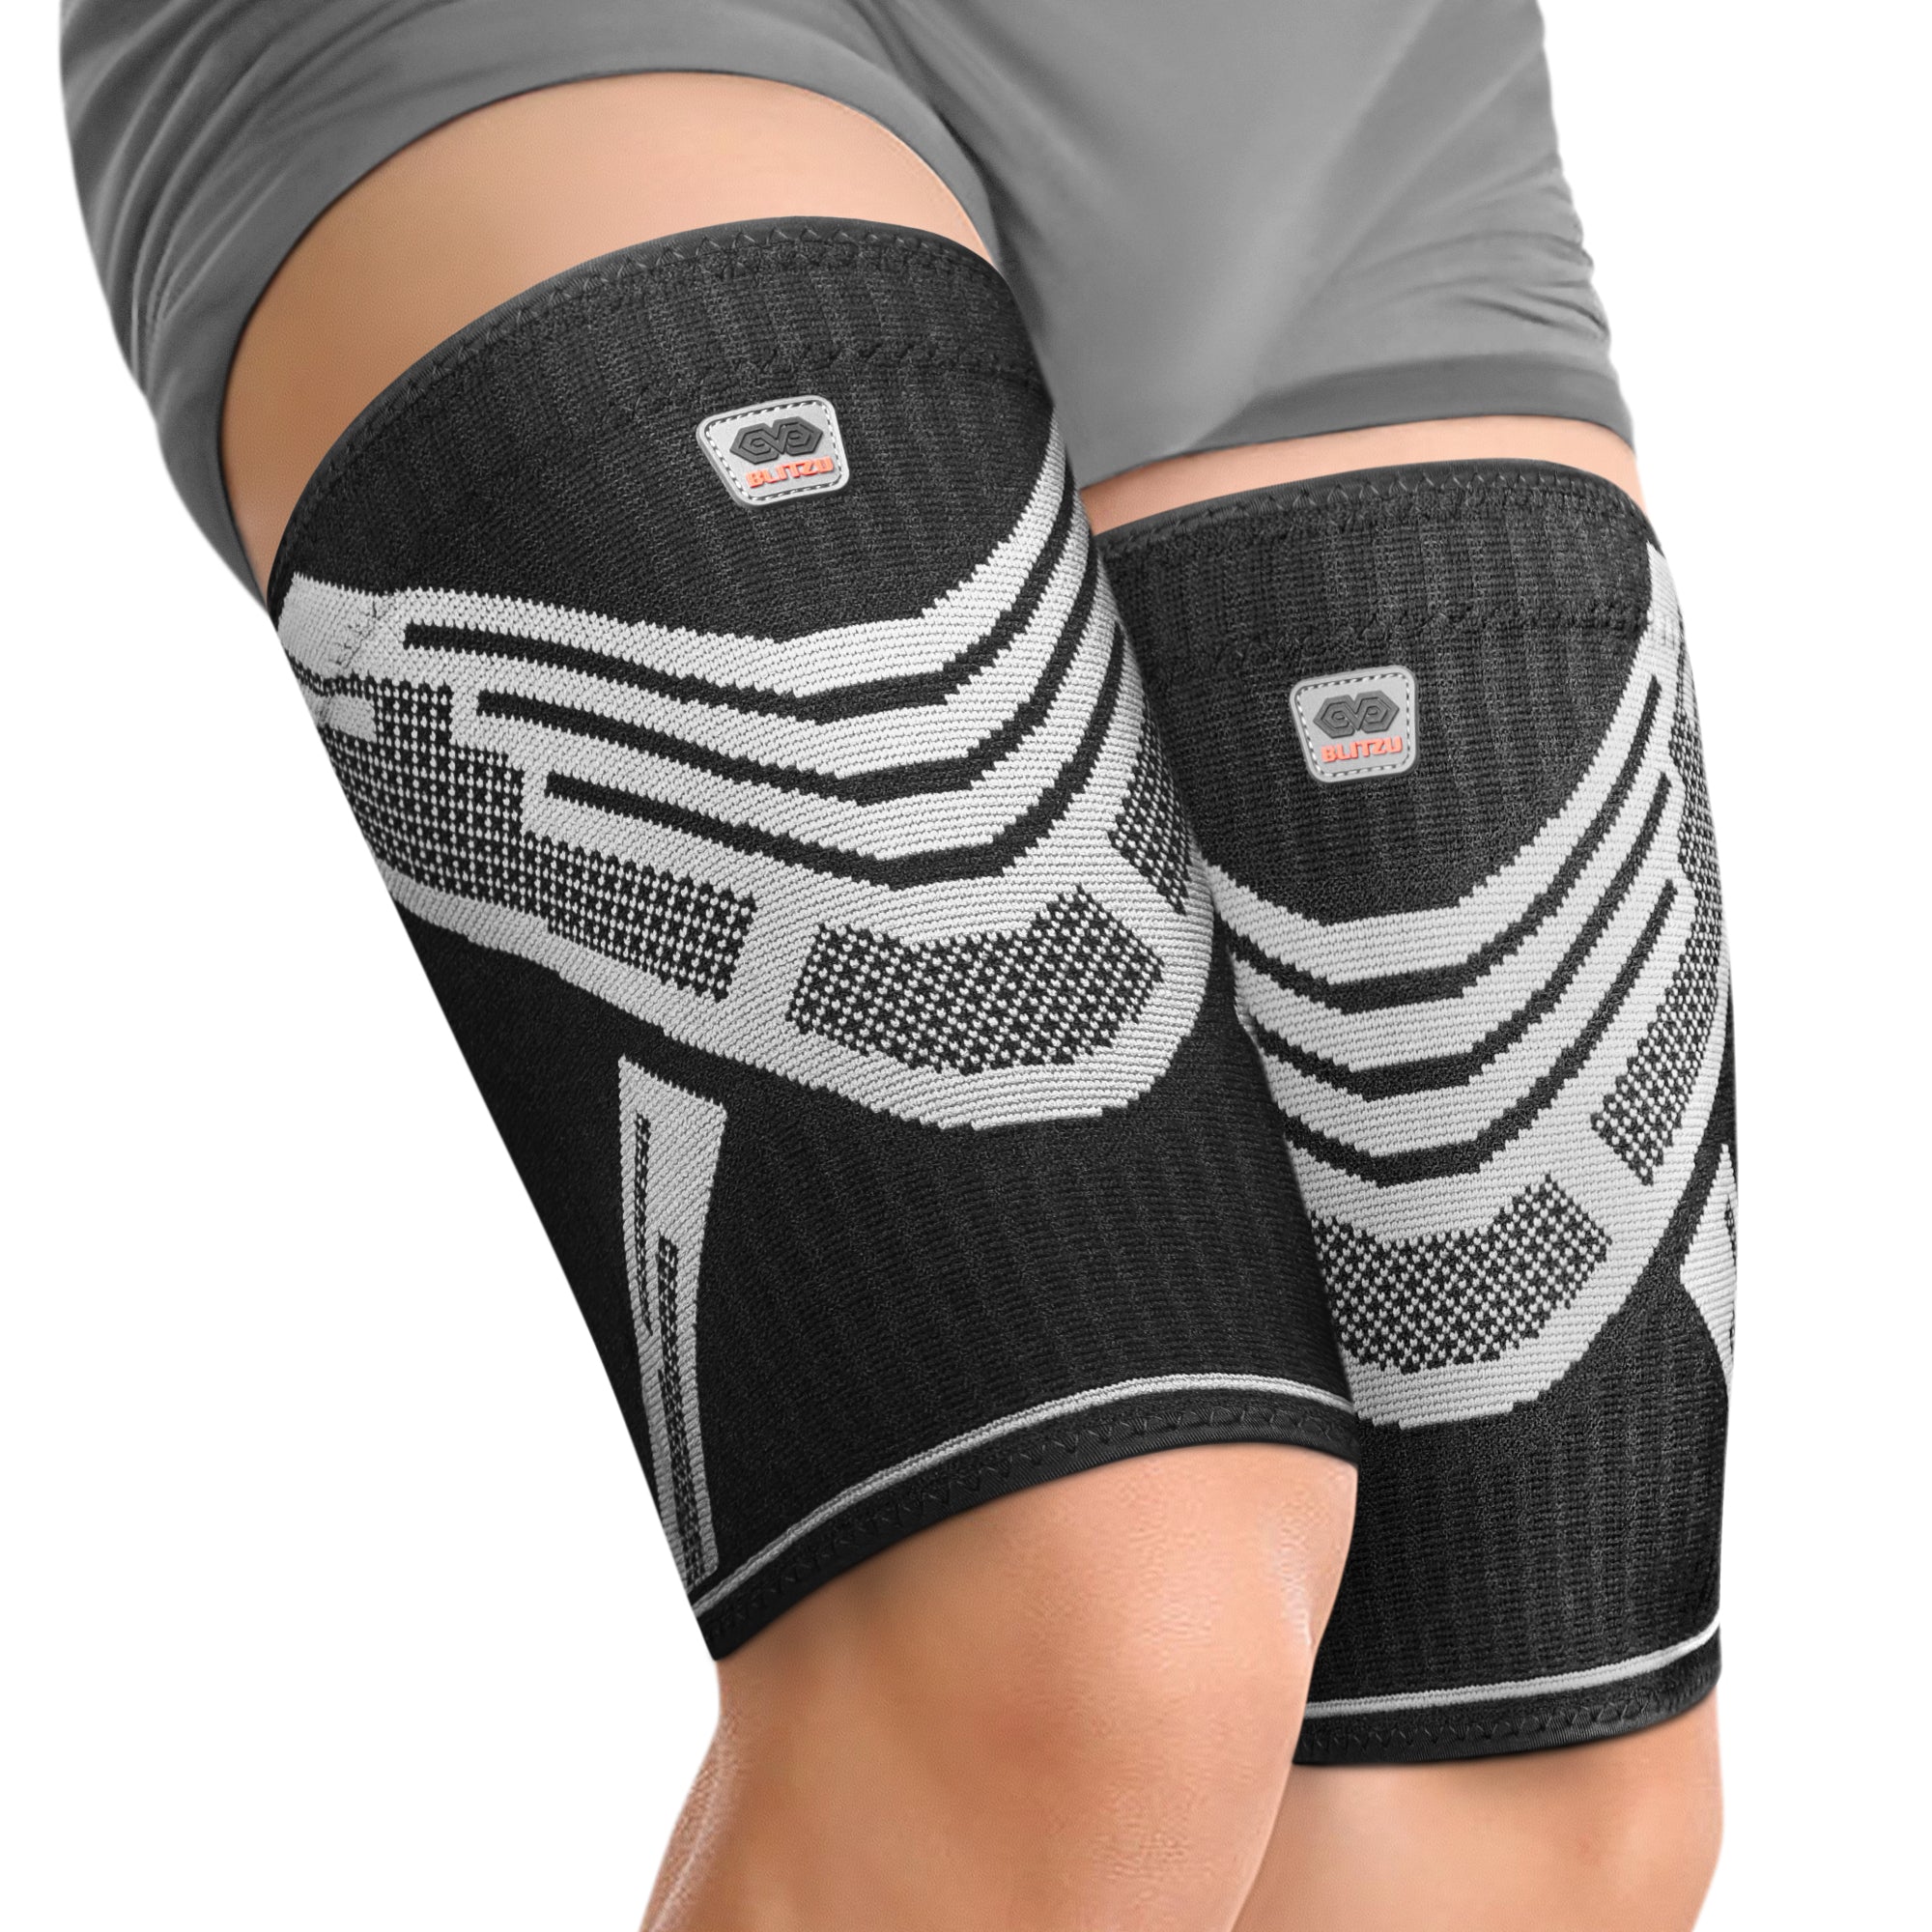 Sports Recovery Compression Full Leg Sleeves (Medium, Blue